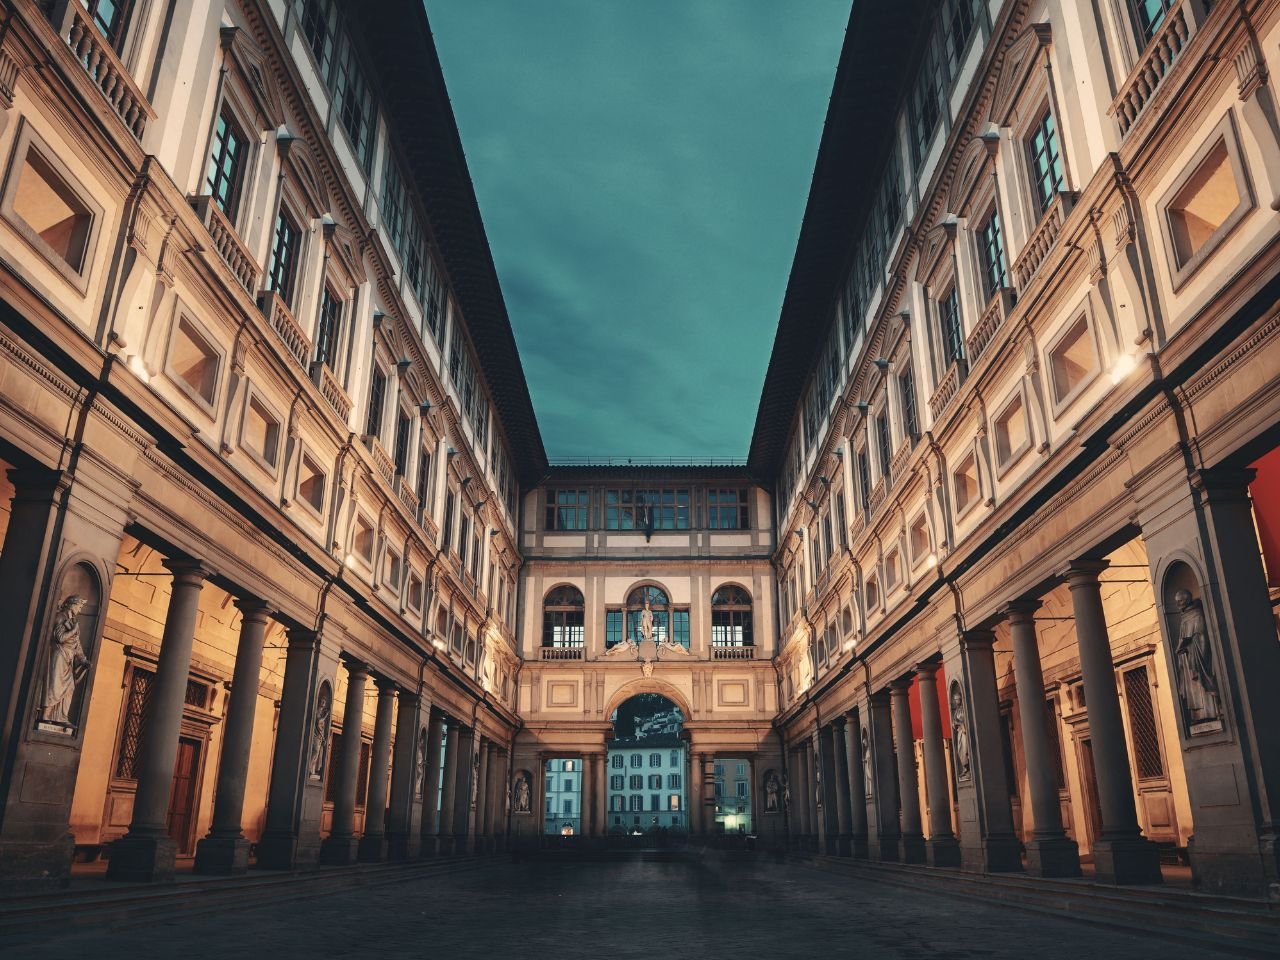 Uffizi Gallery in Florence city of Italy